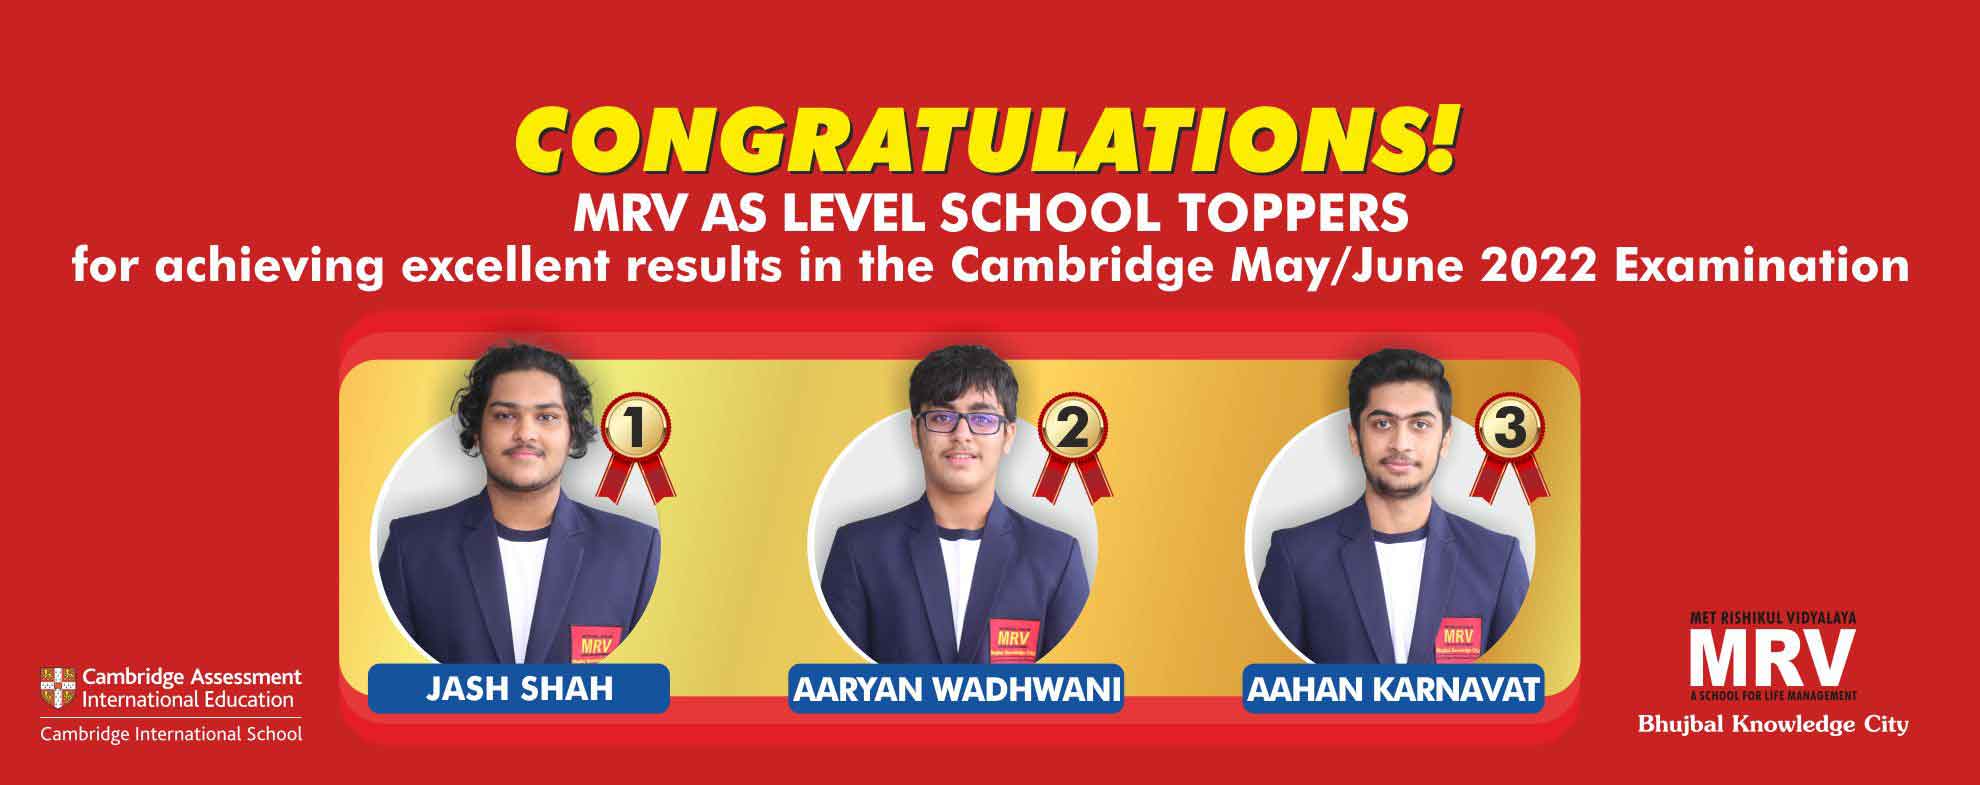 MRV_AS_A_Level_Toppers_2022